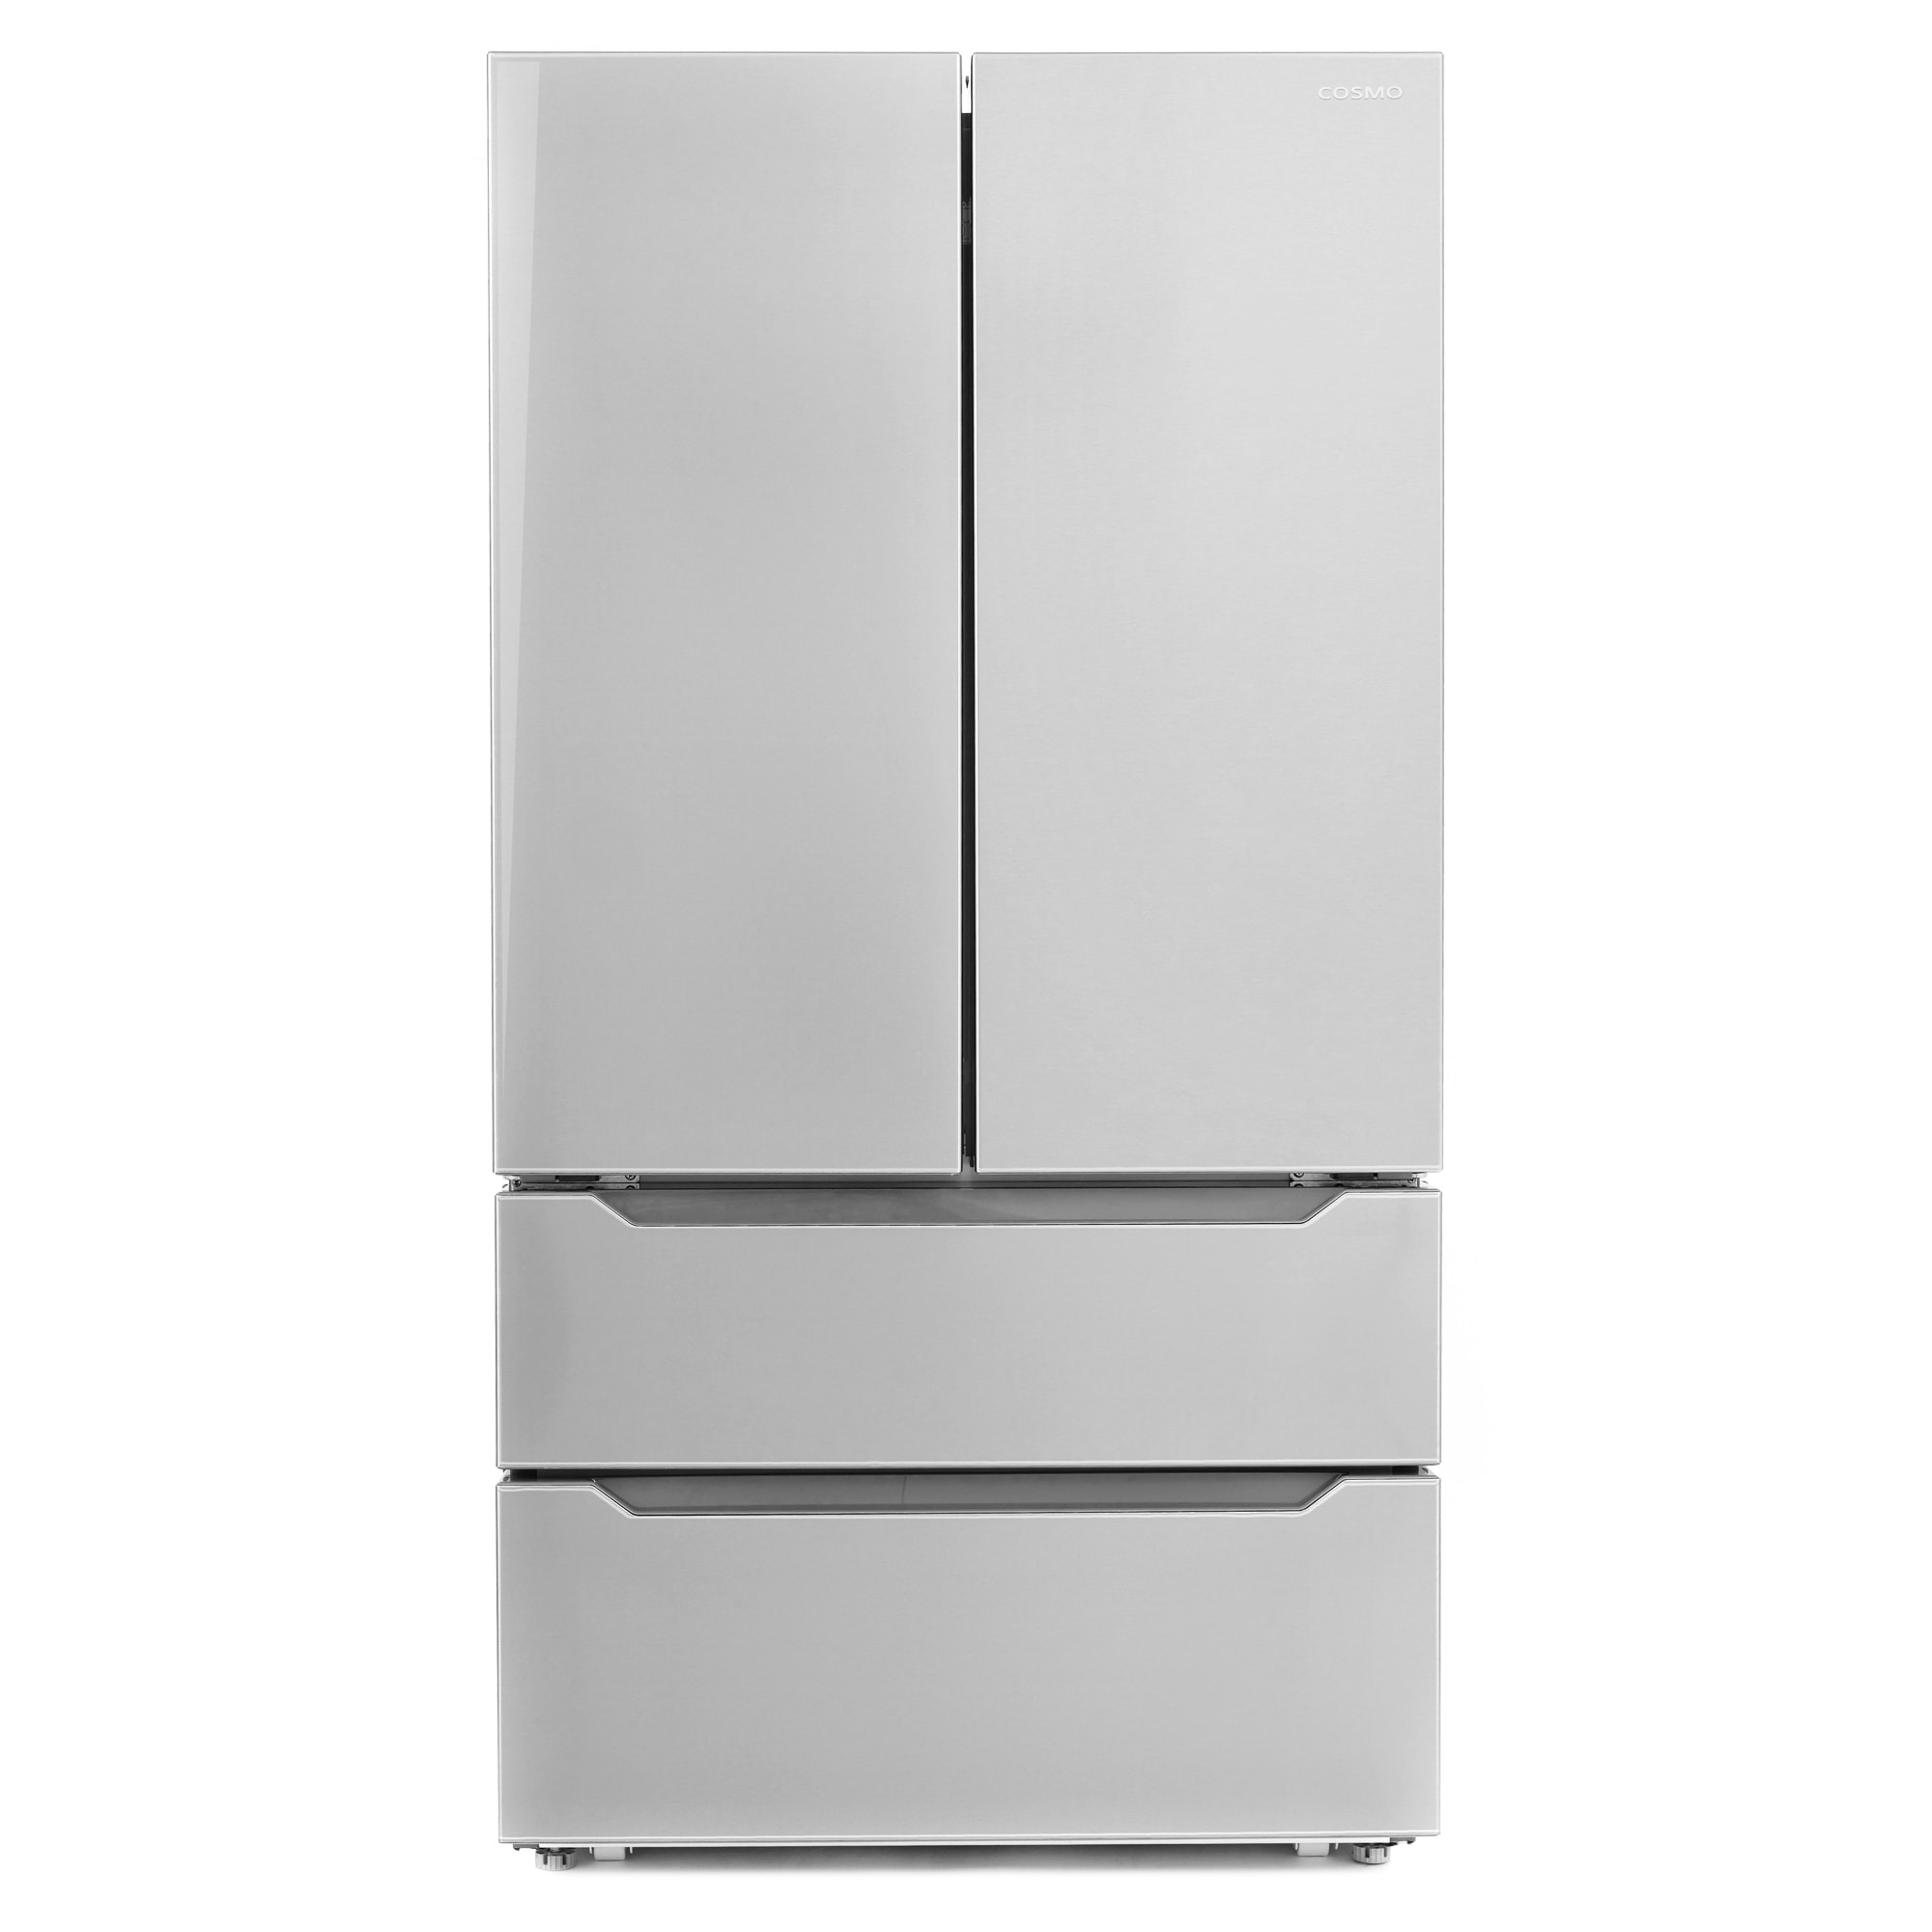 Cosmo 22.5 cu. ft. 4-Door Counter-Depth French Door Refrigerator with 2 Freezer Drawers in Stainless Steel, Automatic Ice Maker